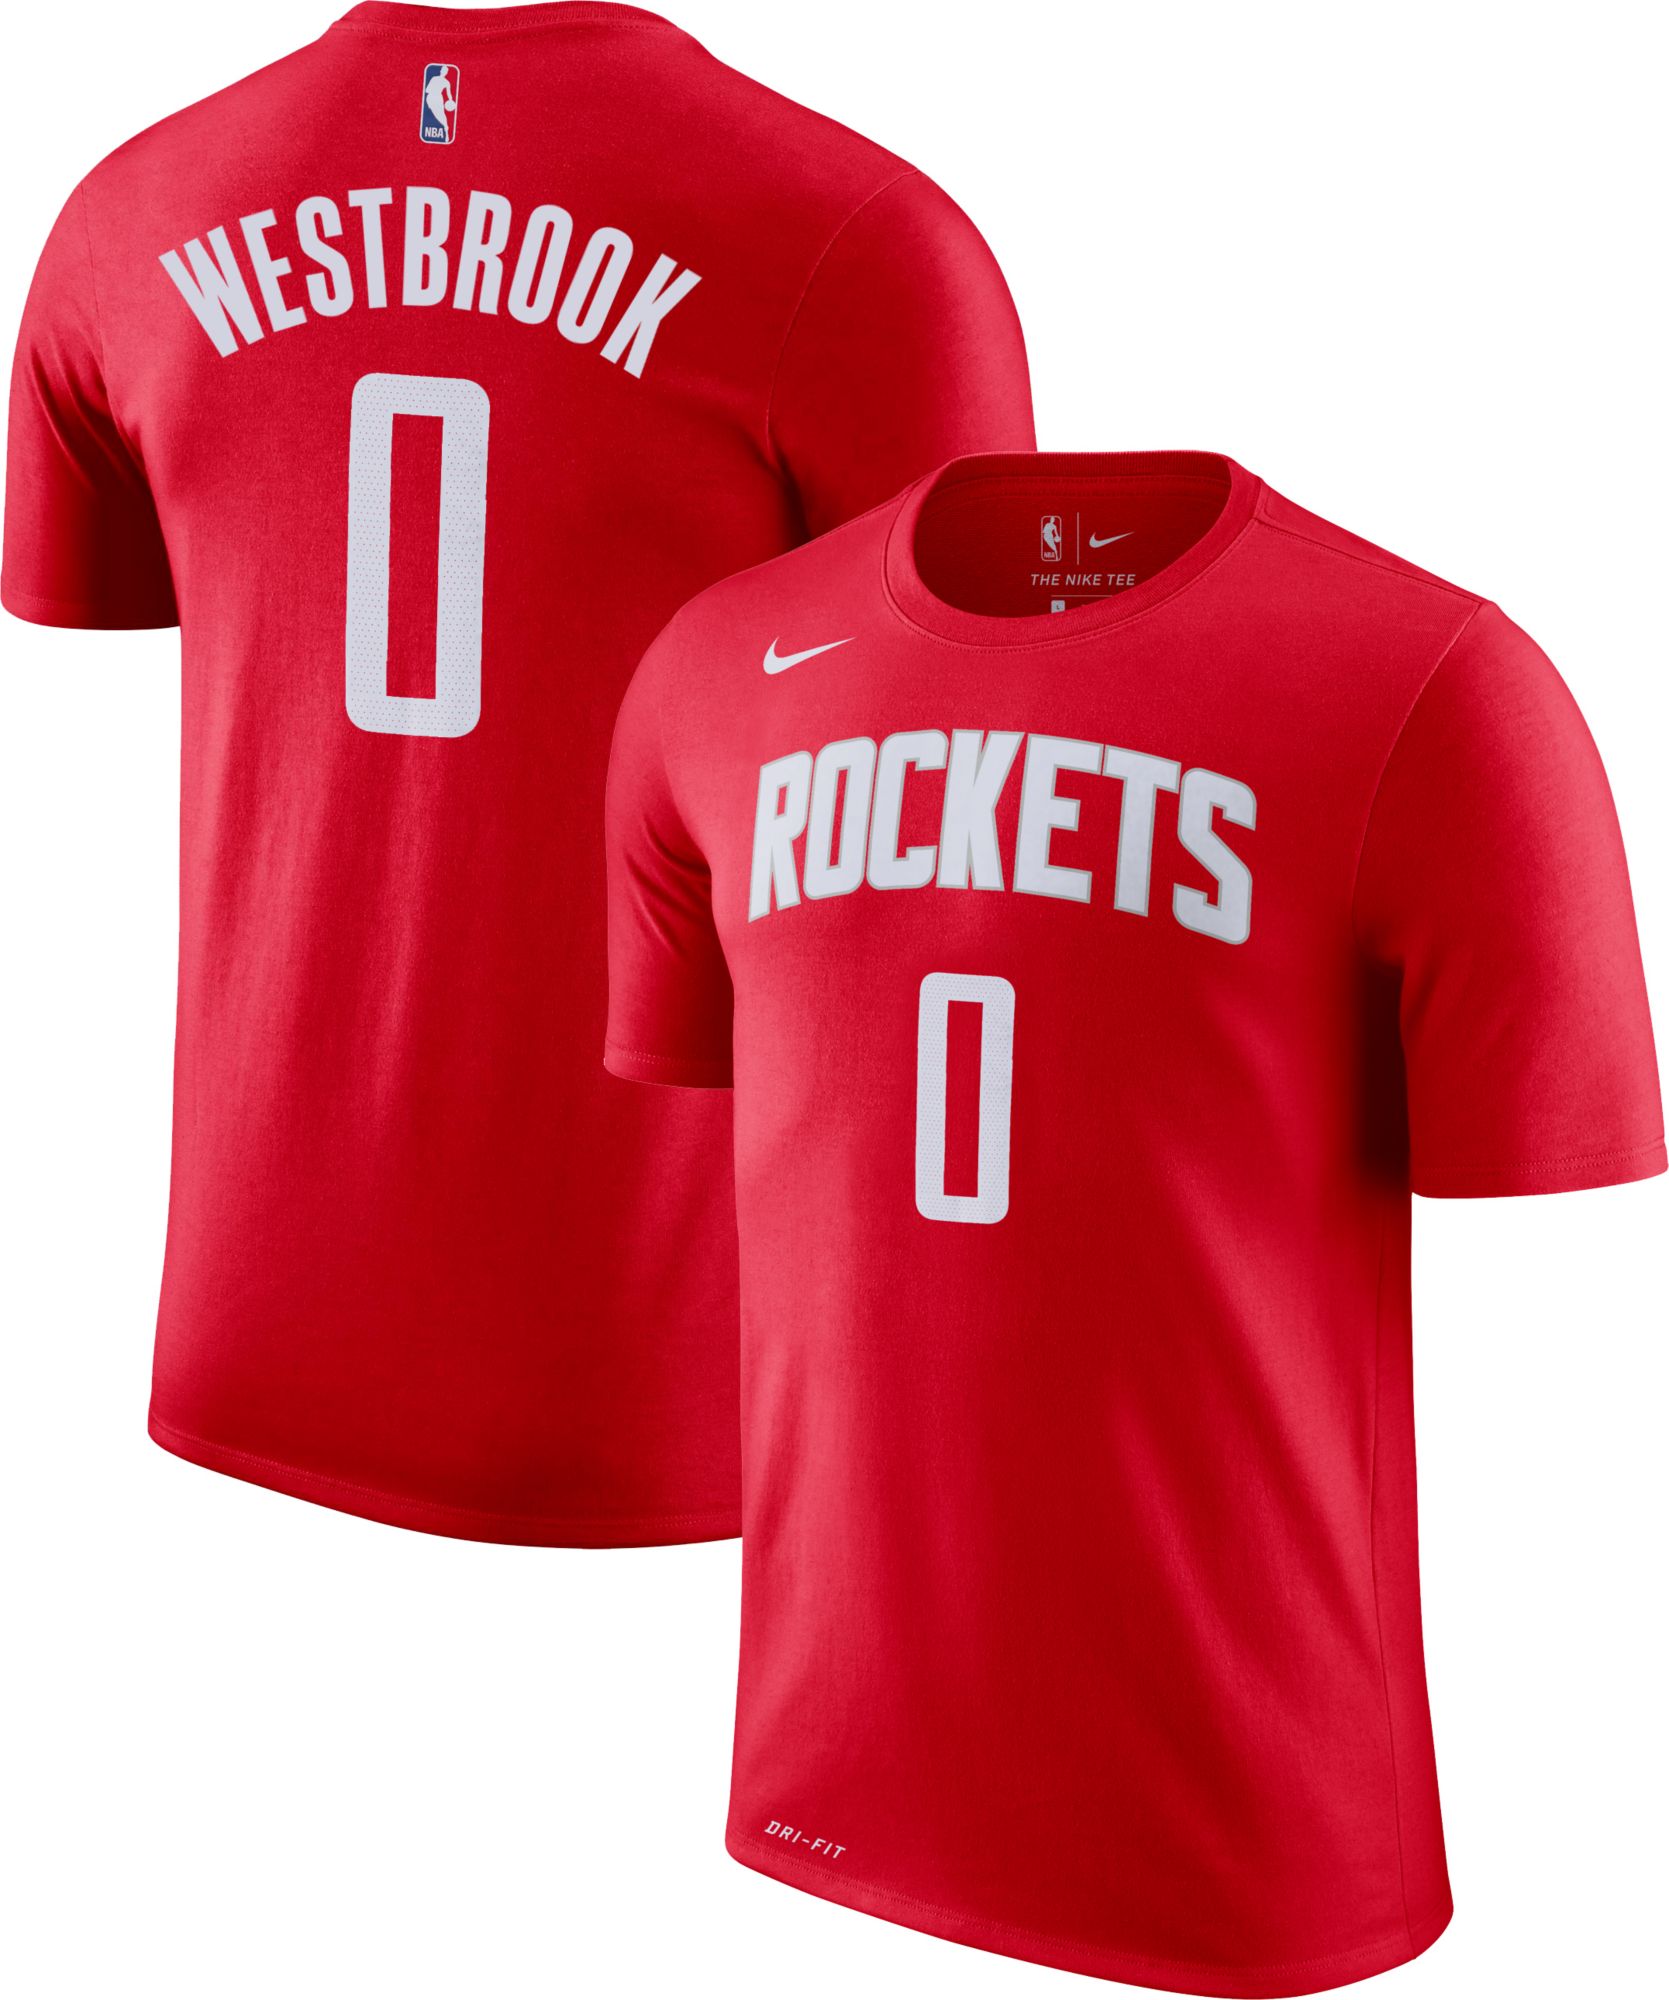 russell westbrook dri fit shirt